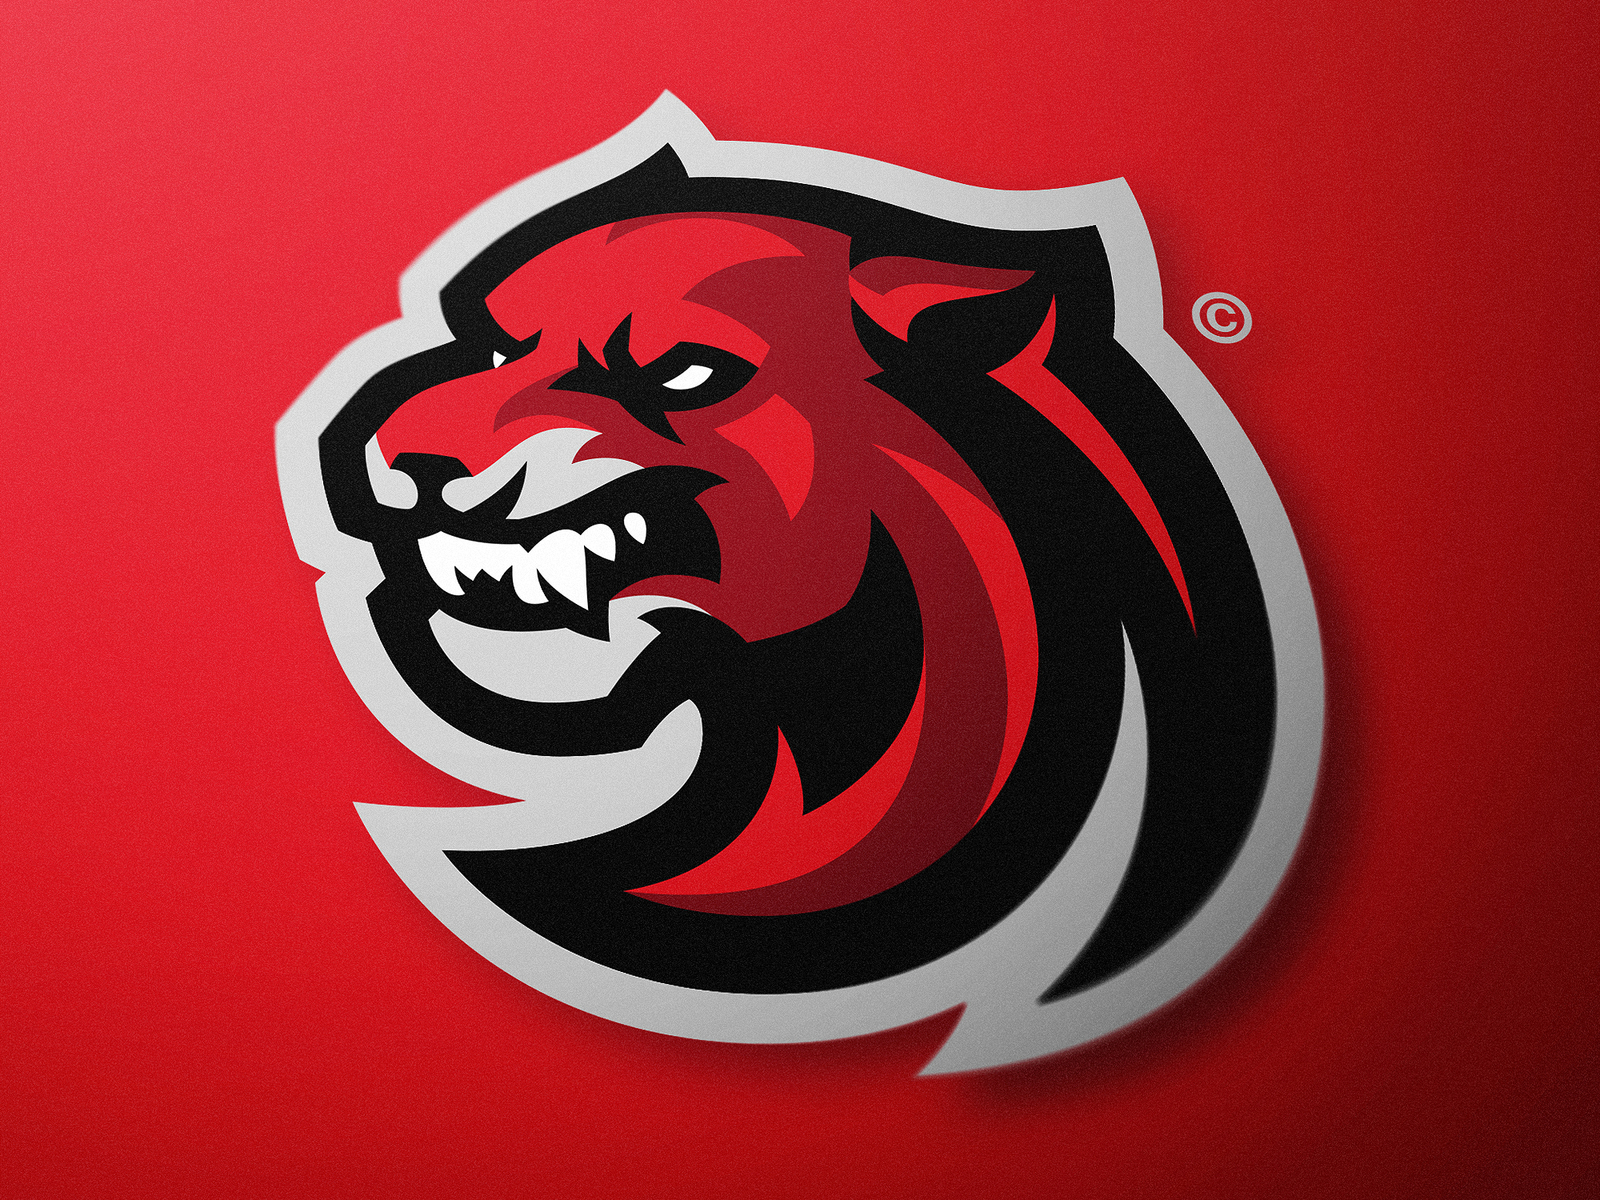 Cougar Sports Logo Design (FOR SALE) by Derrick Stratton on Dribbble